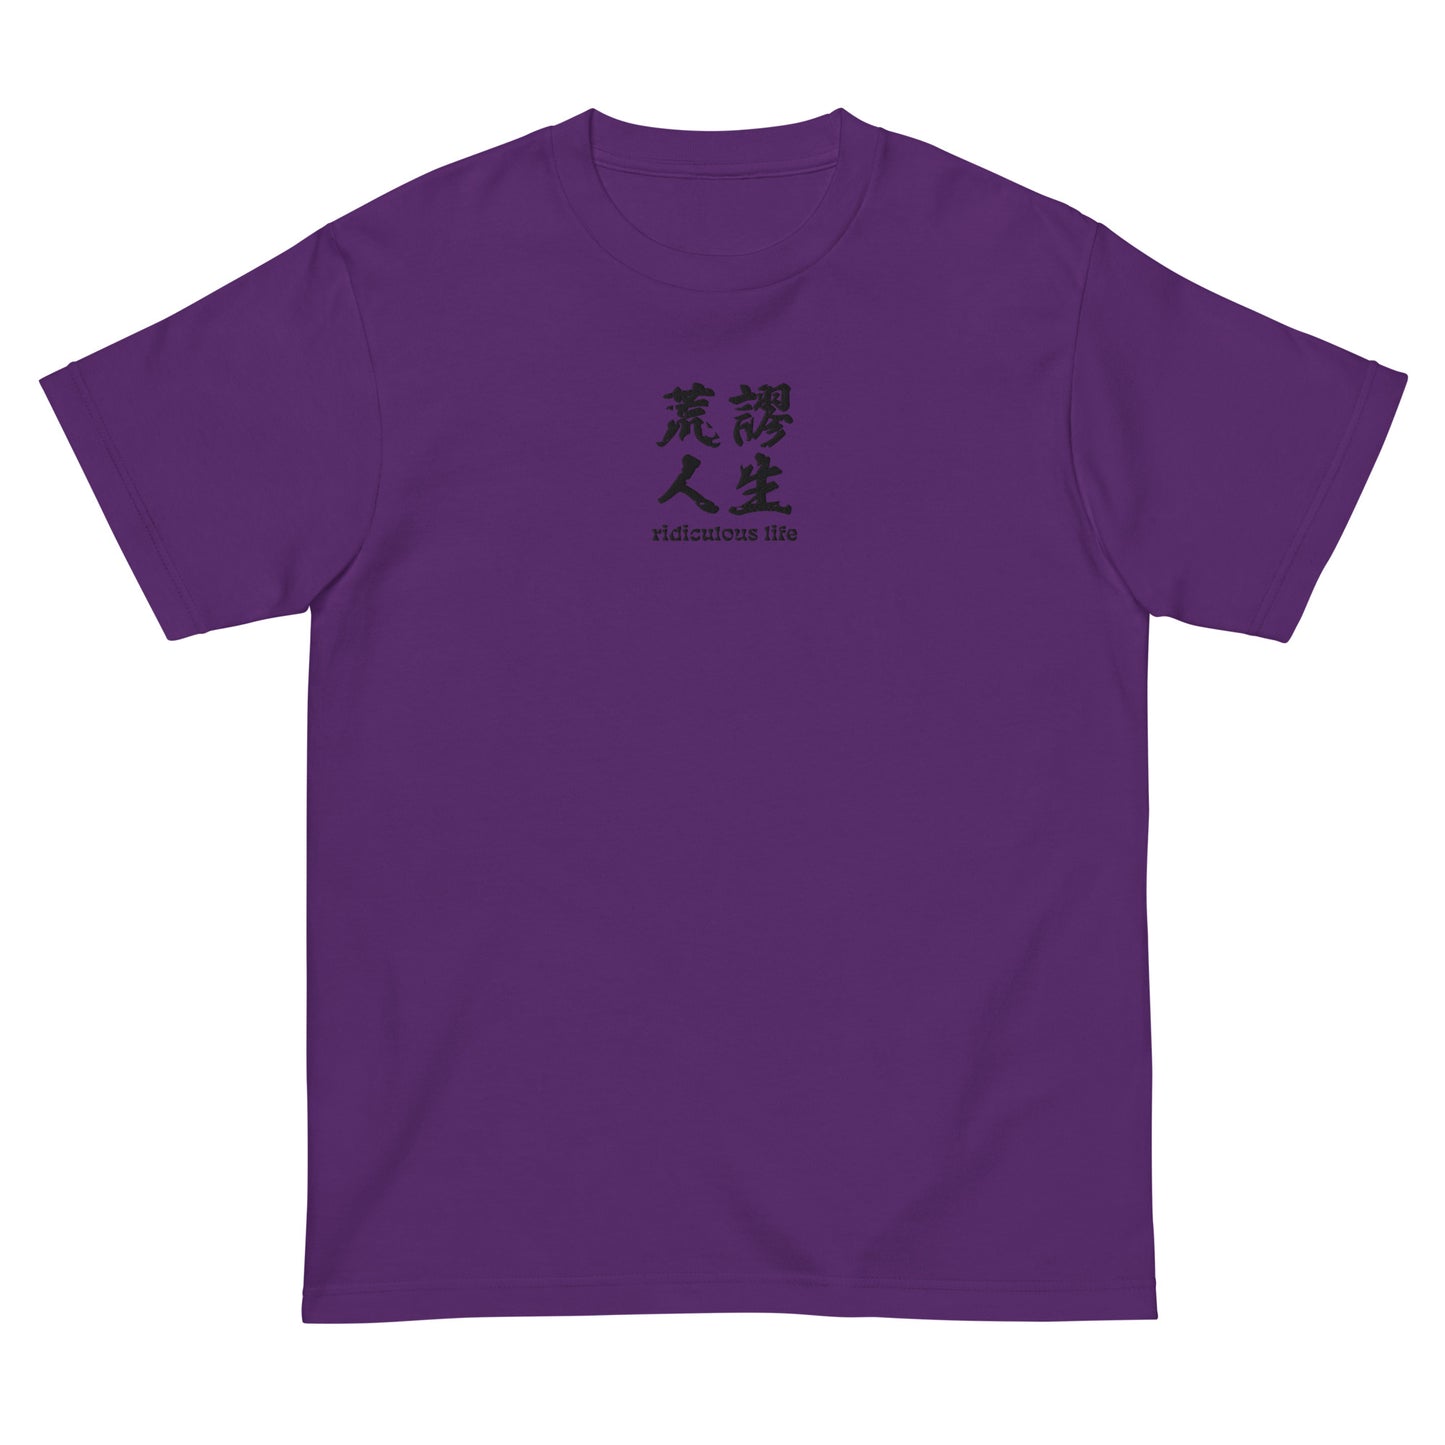 Purple High Quality Tee - Front Design with an Black Embroidery "Ridiculous Life" in Chinese and English 